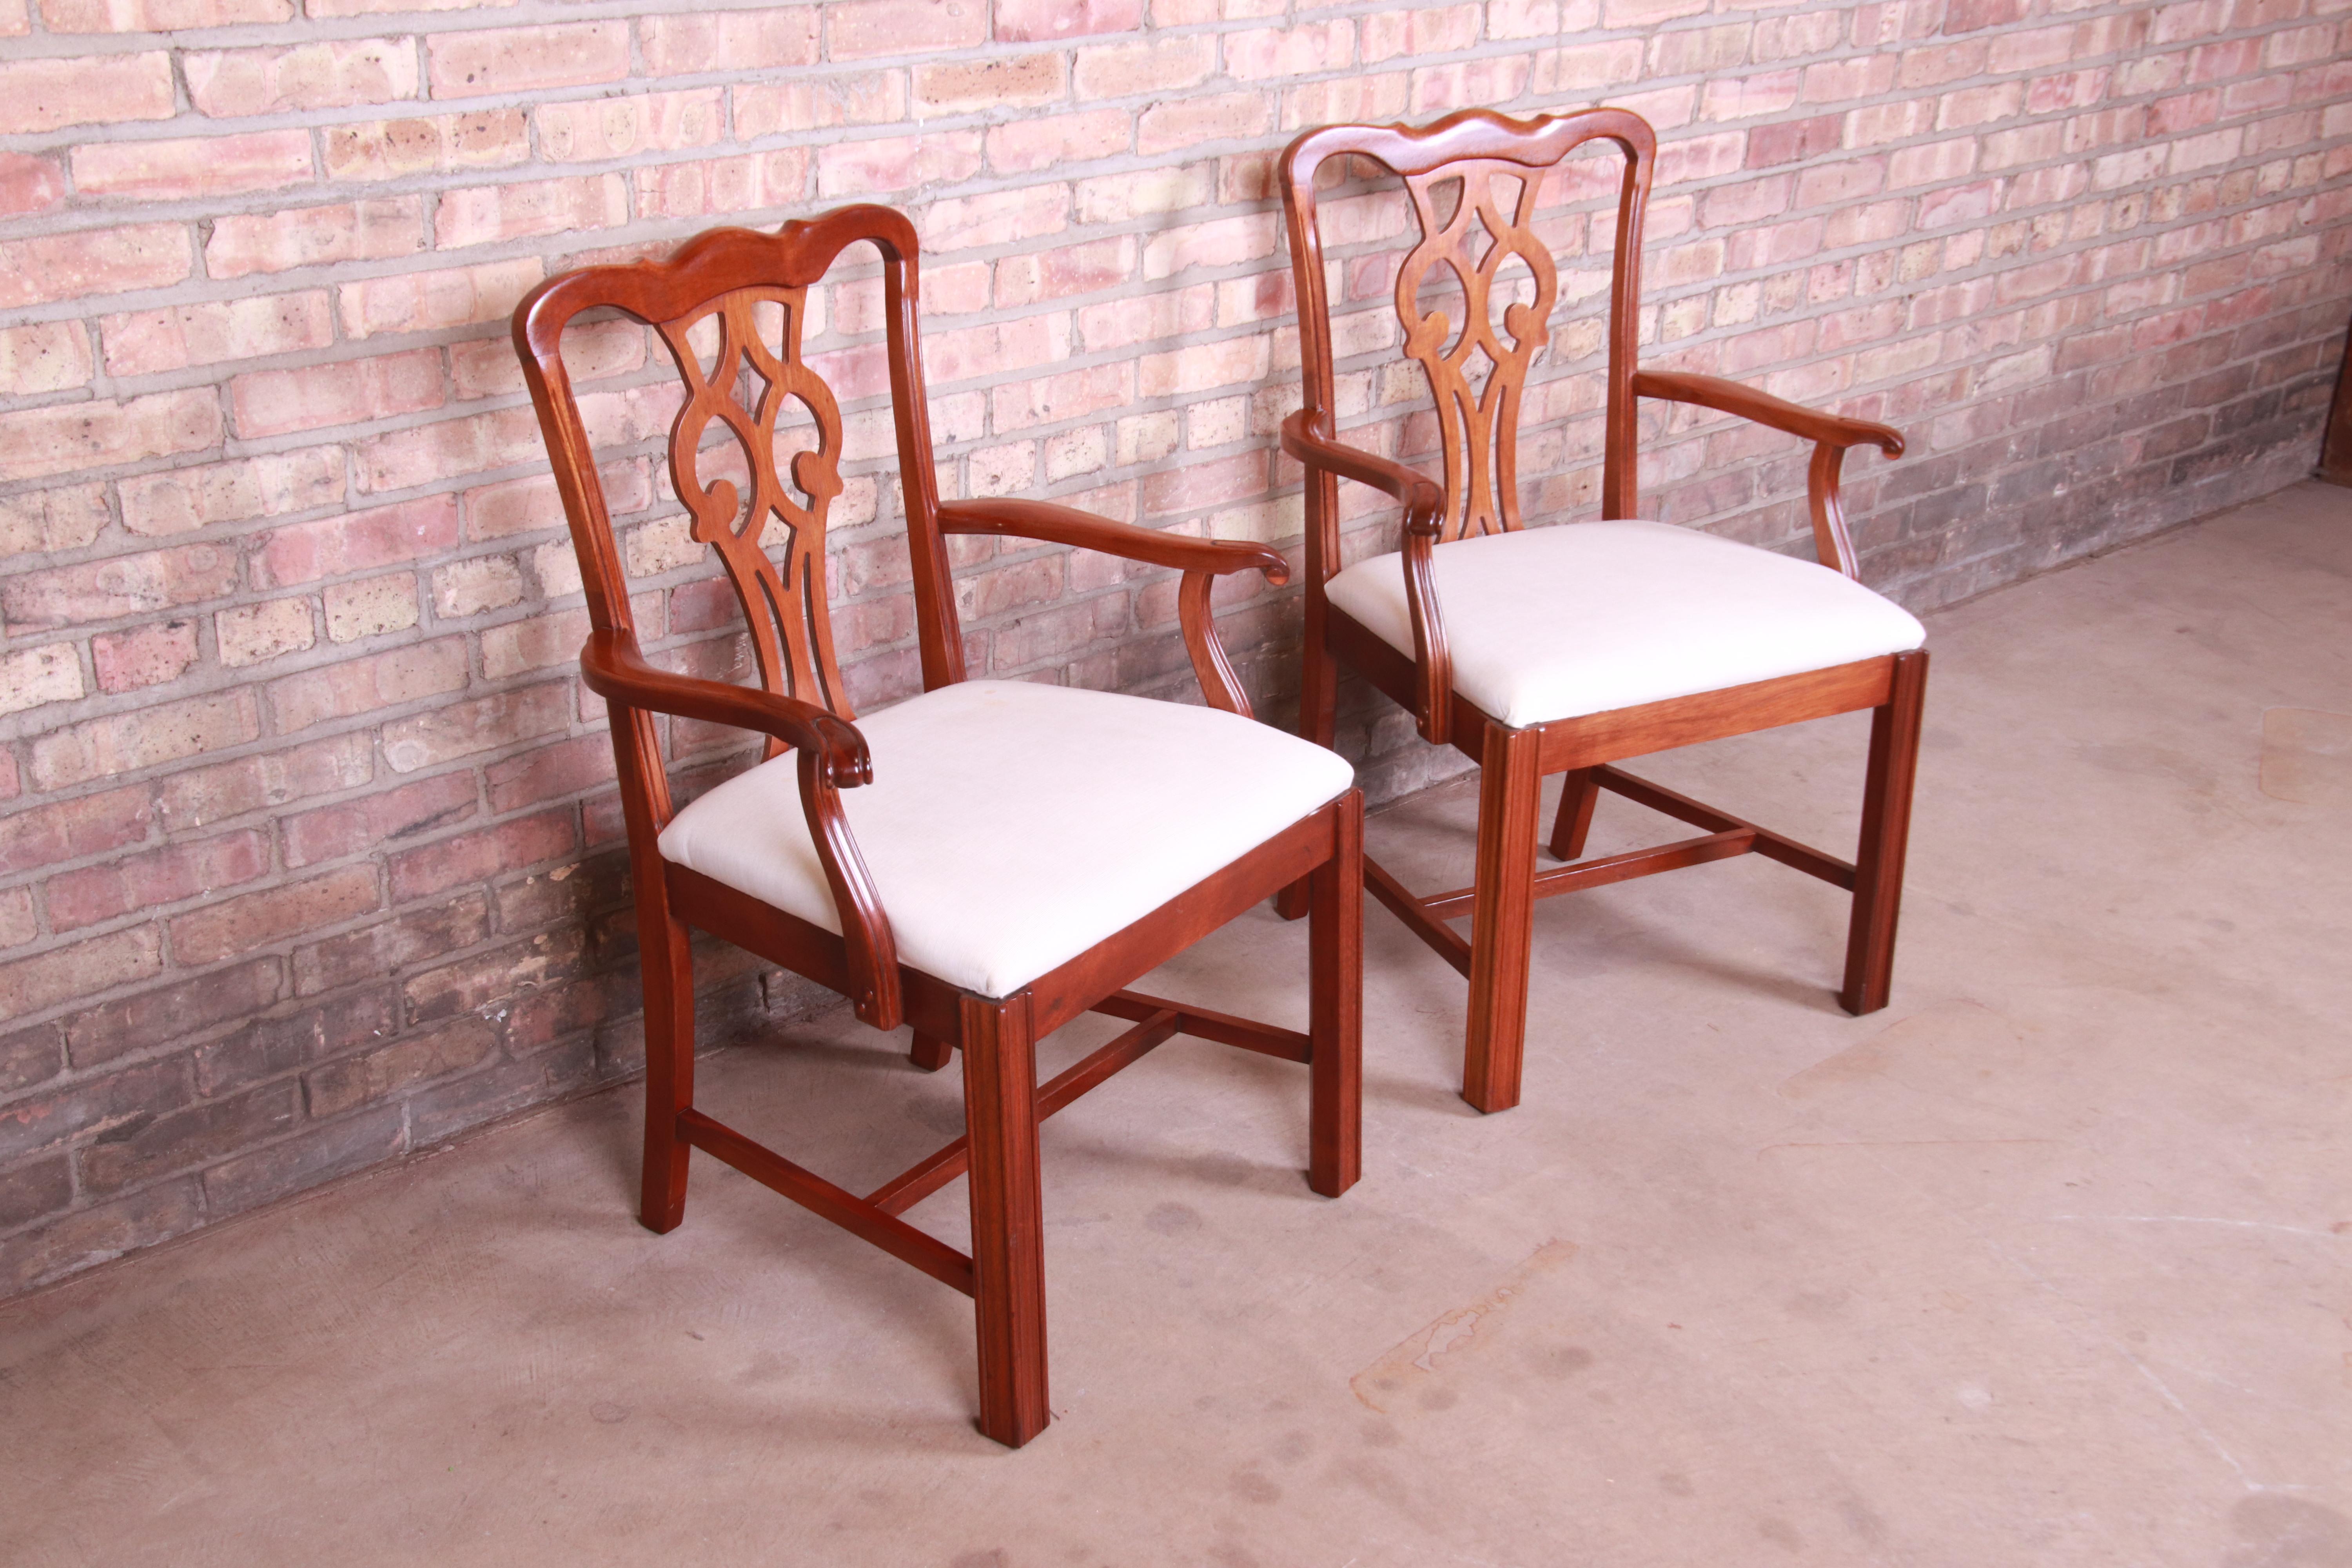 A gorgeous pair of club chairs or dining armchairs

By Ephraim Marsh

USA, mid-20th century

Solid mahogany frames with ivory upholstered seats.

Measures: 26